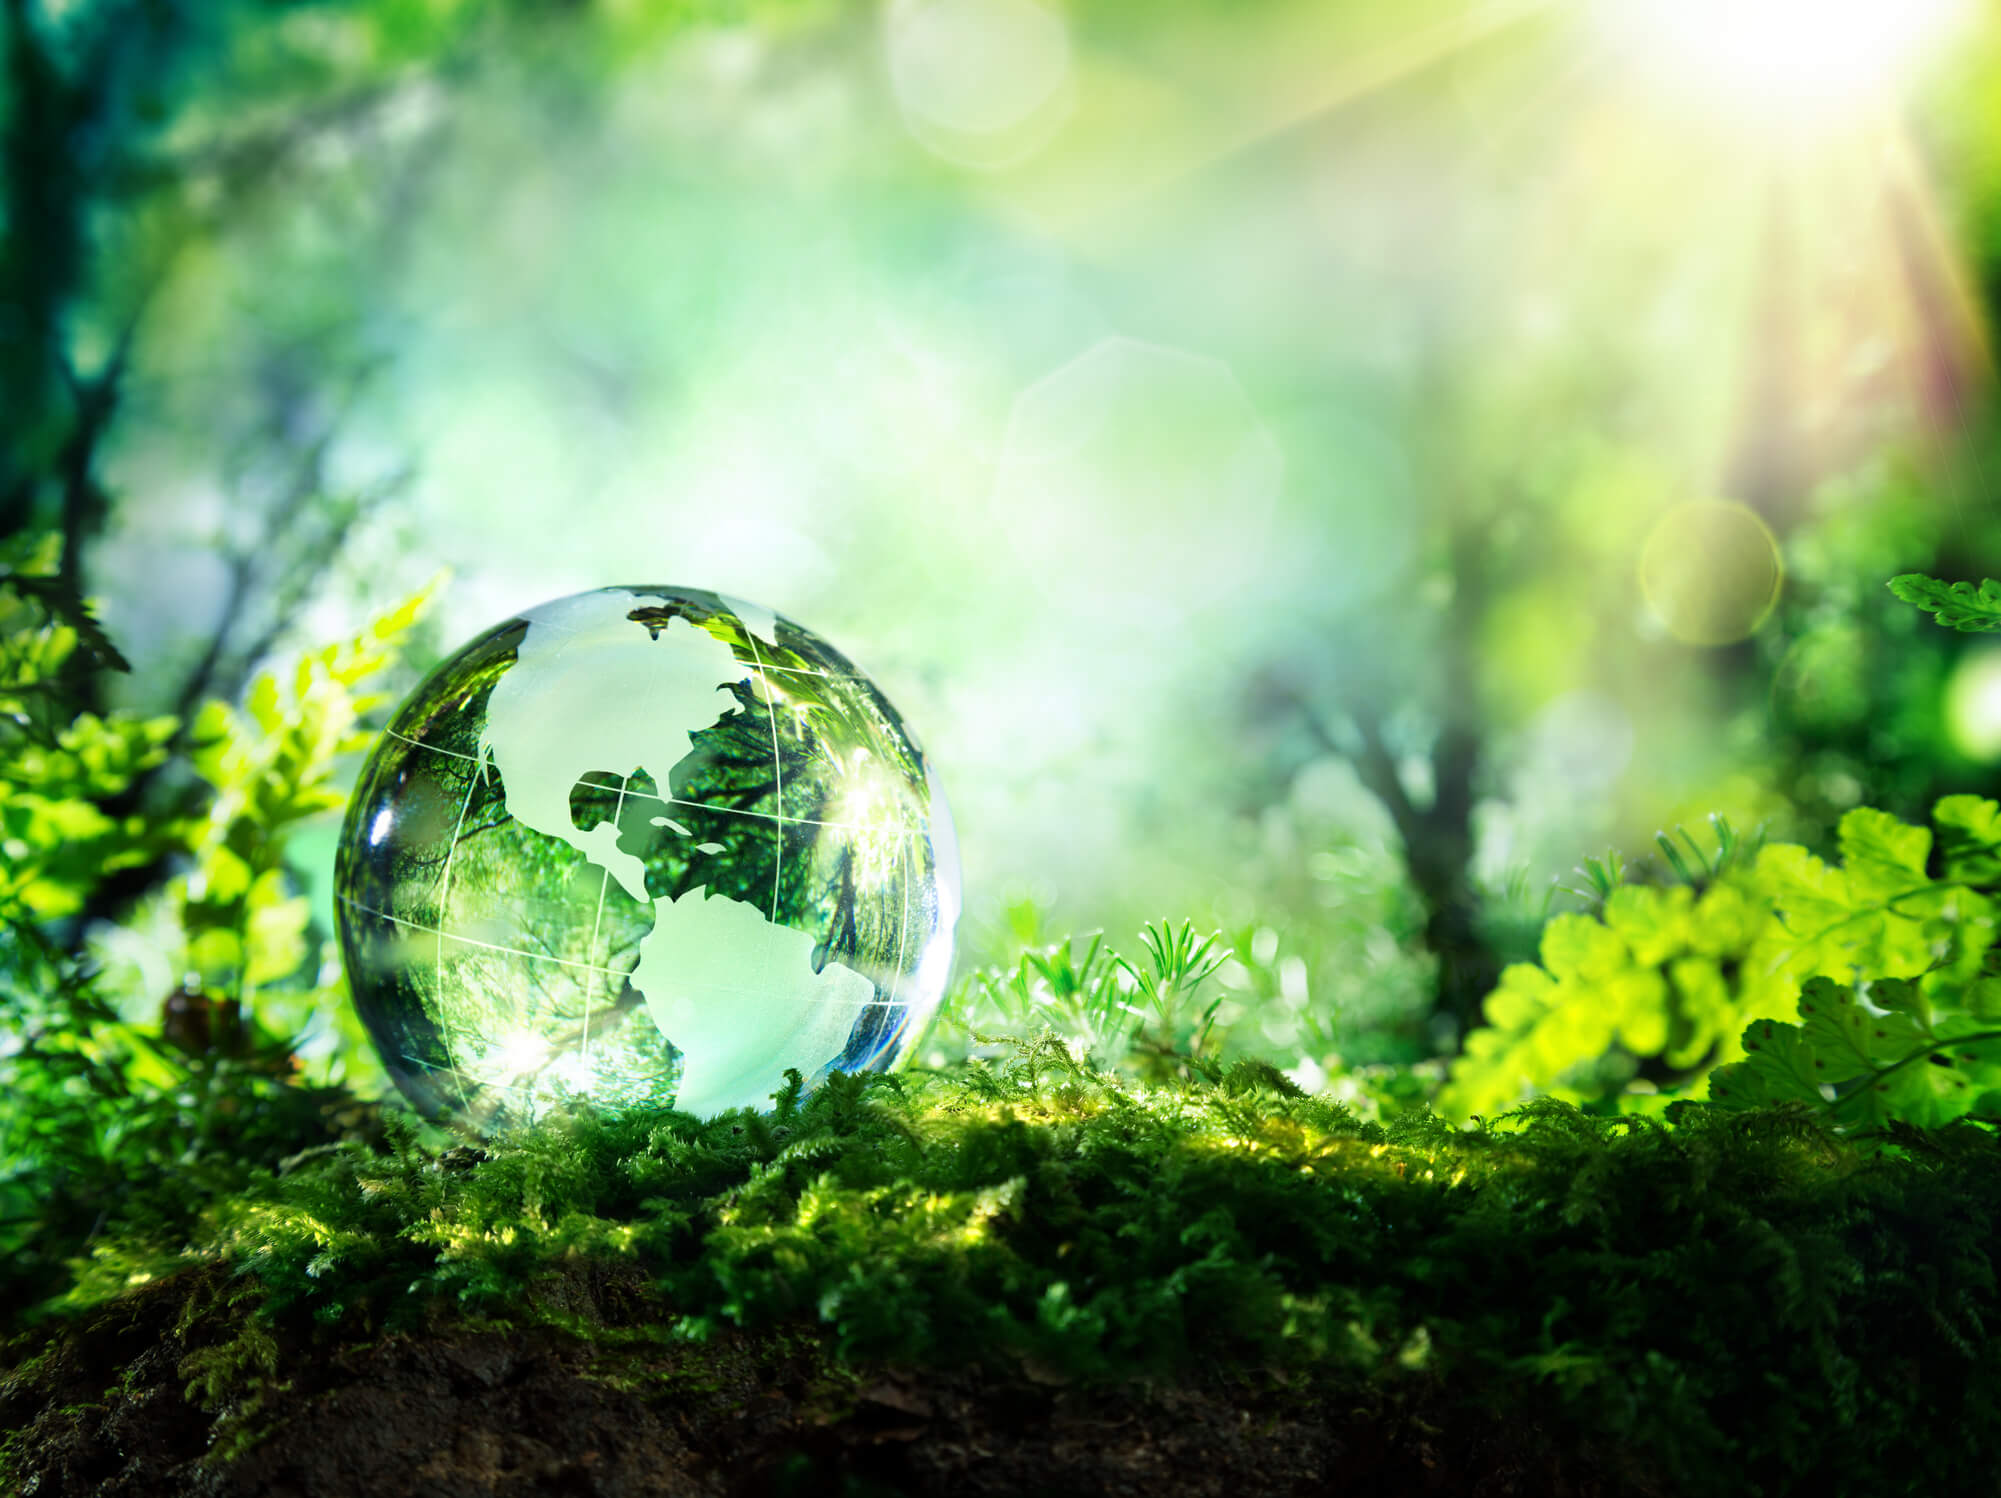 Glass model of the planet in a green forest